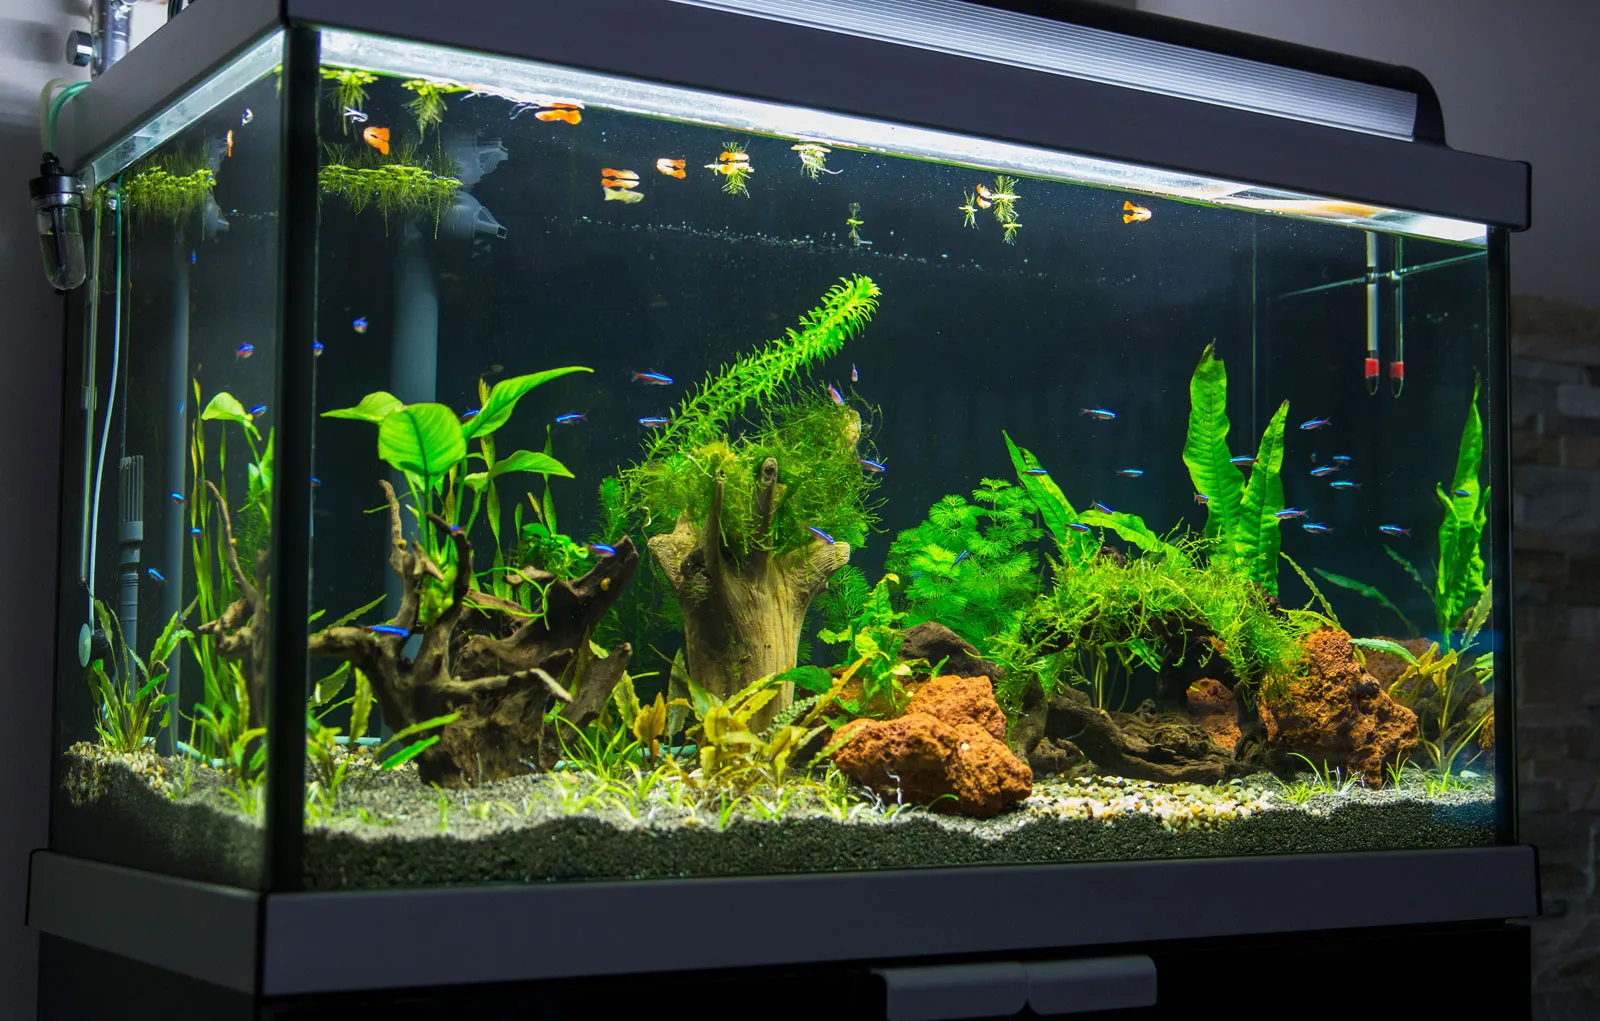 How to Heat Up A Fish Tank Without a Heater? 